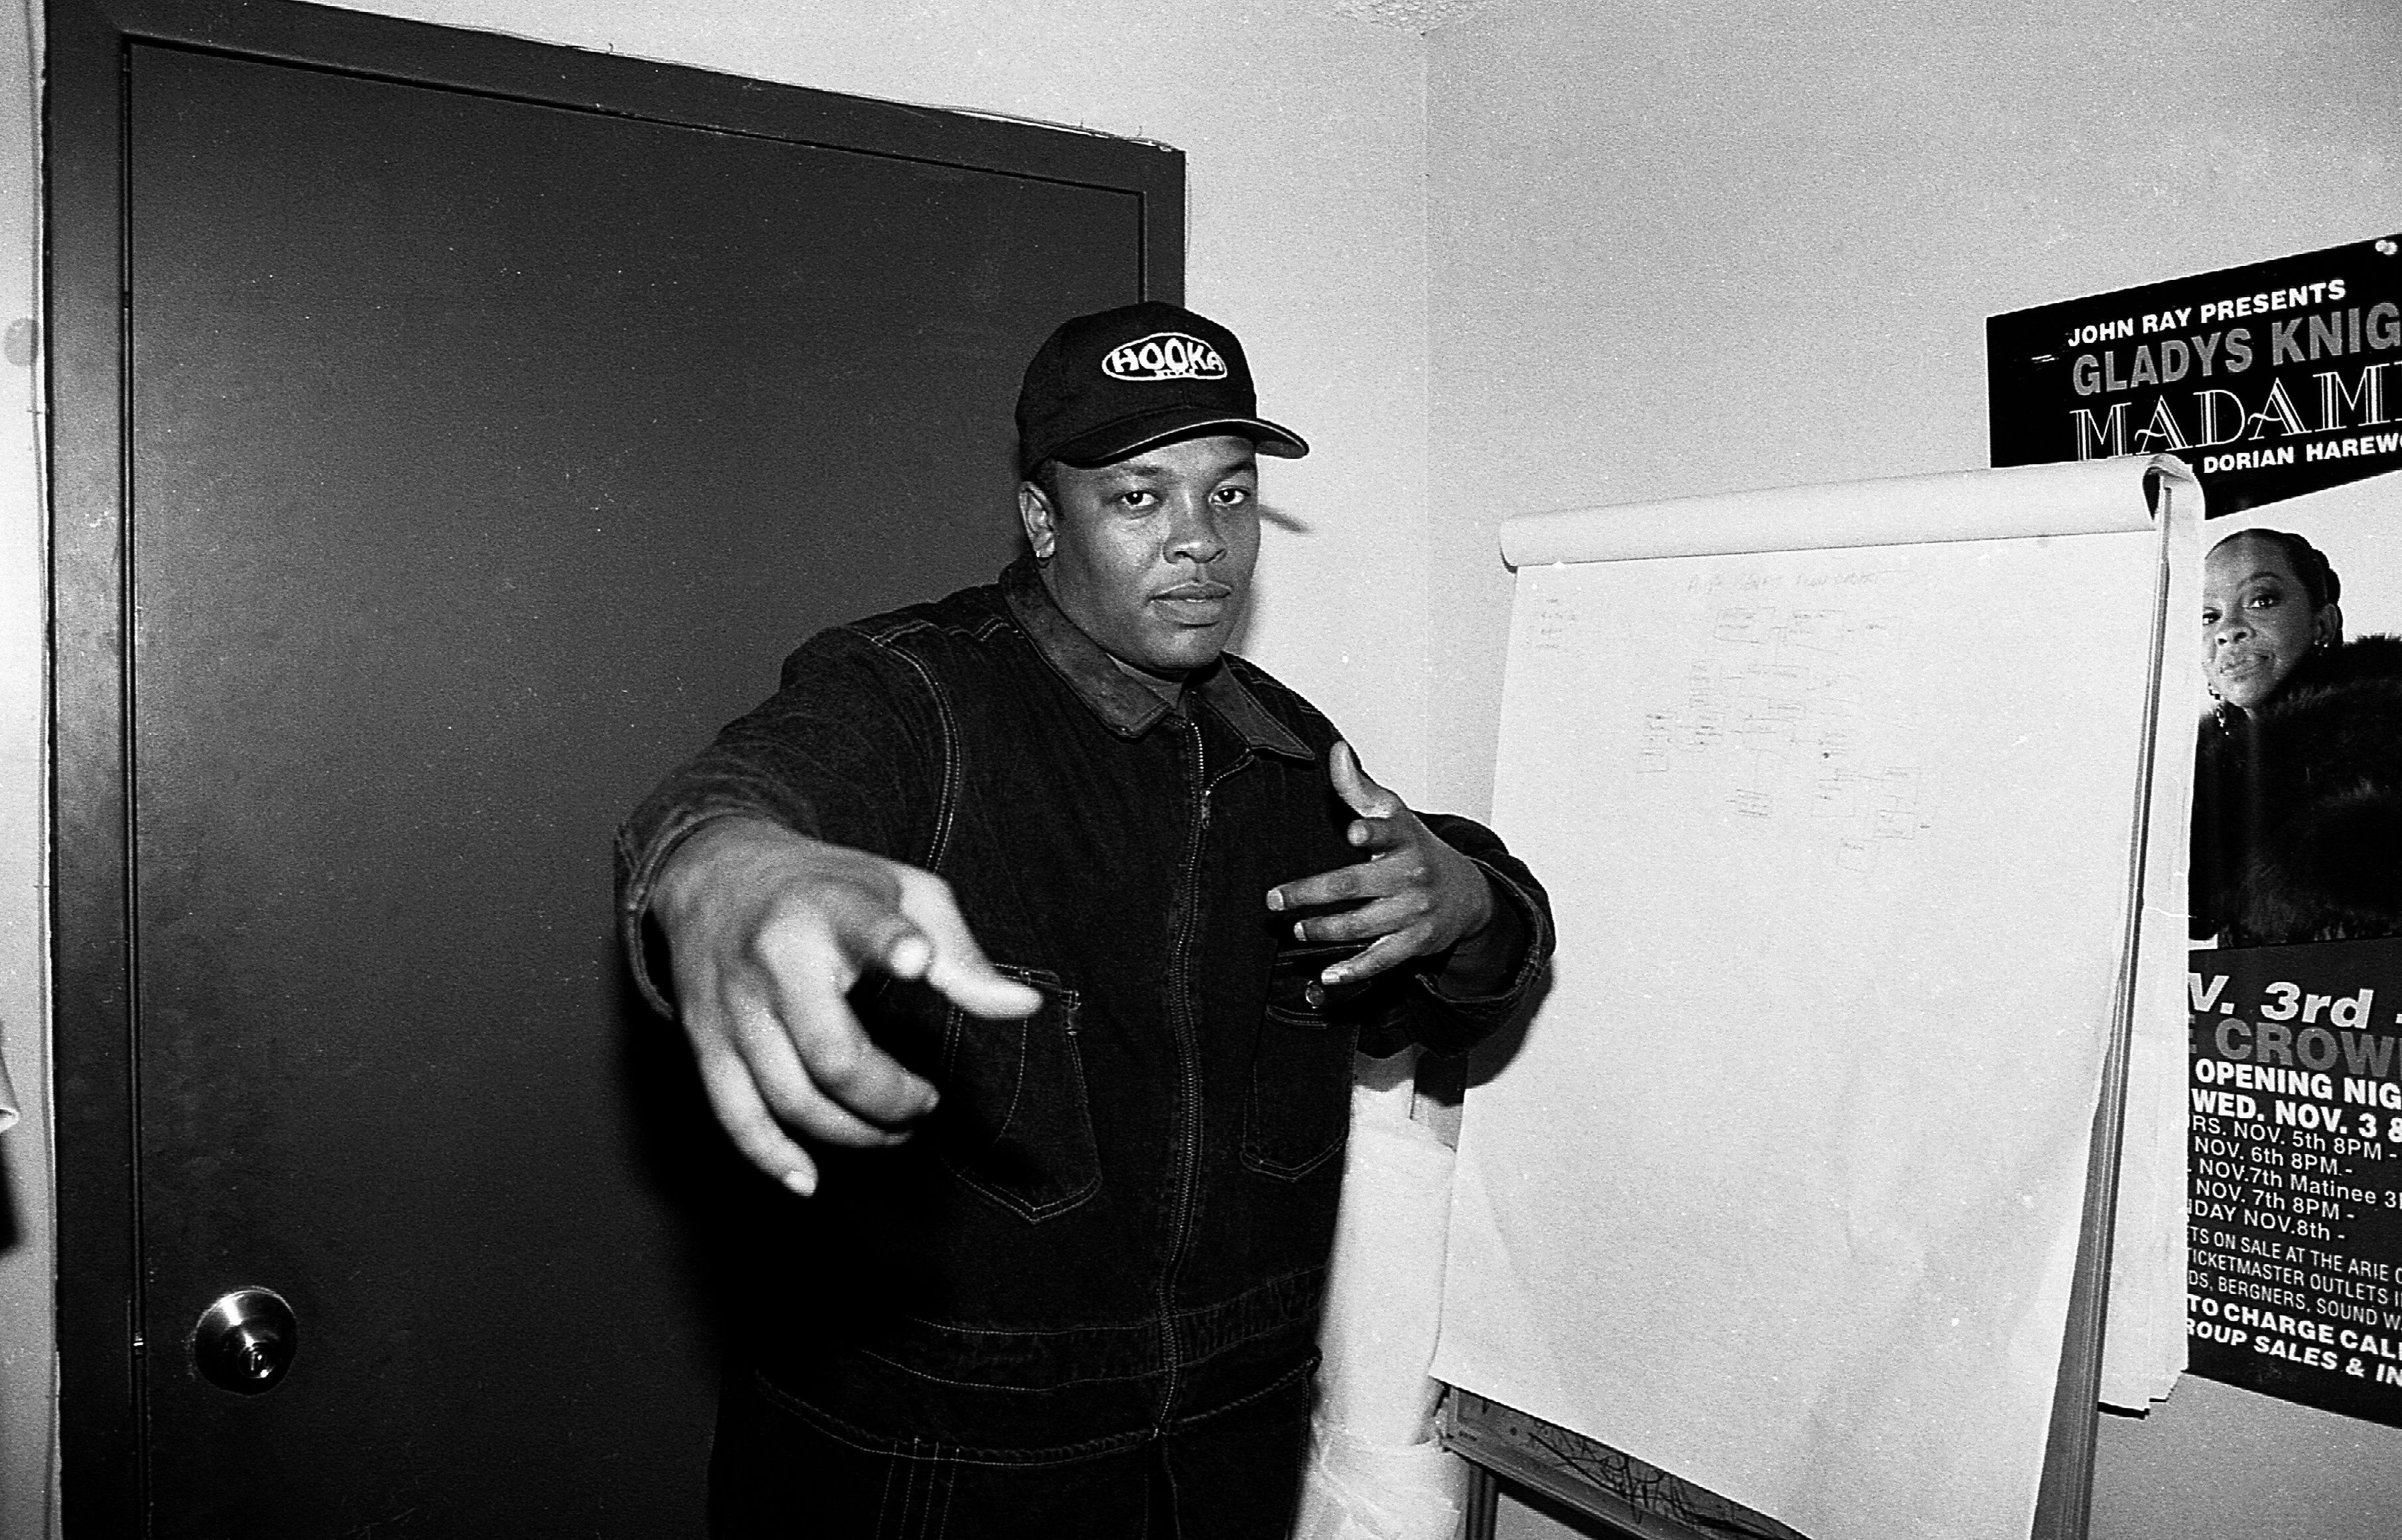 Rapper and producer Dr. Dre poses for photos backstage at the Regal Theater in Chicago in January 1993.